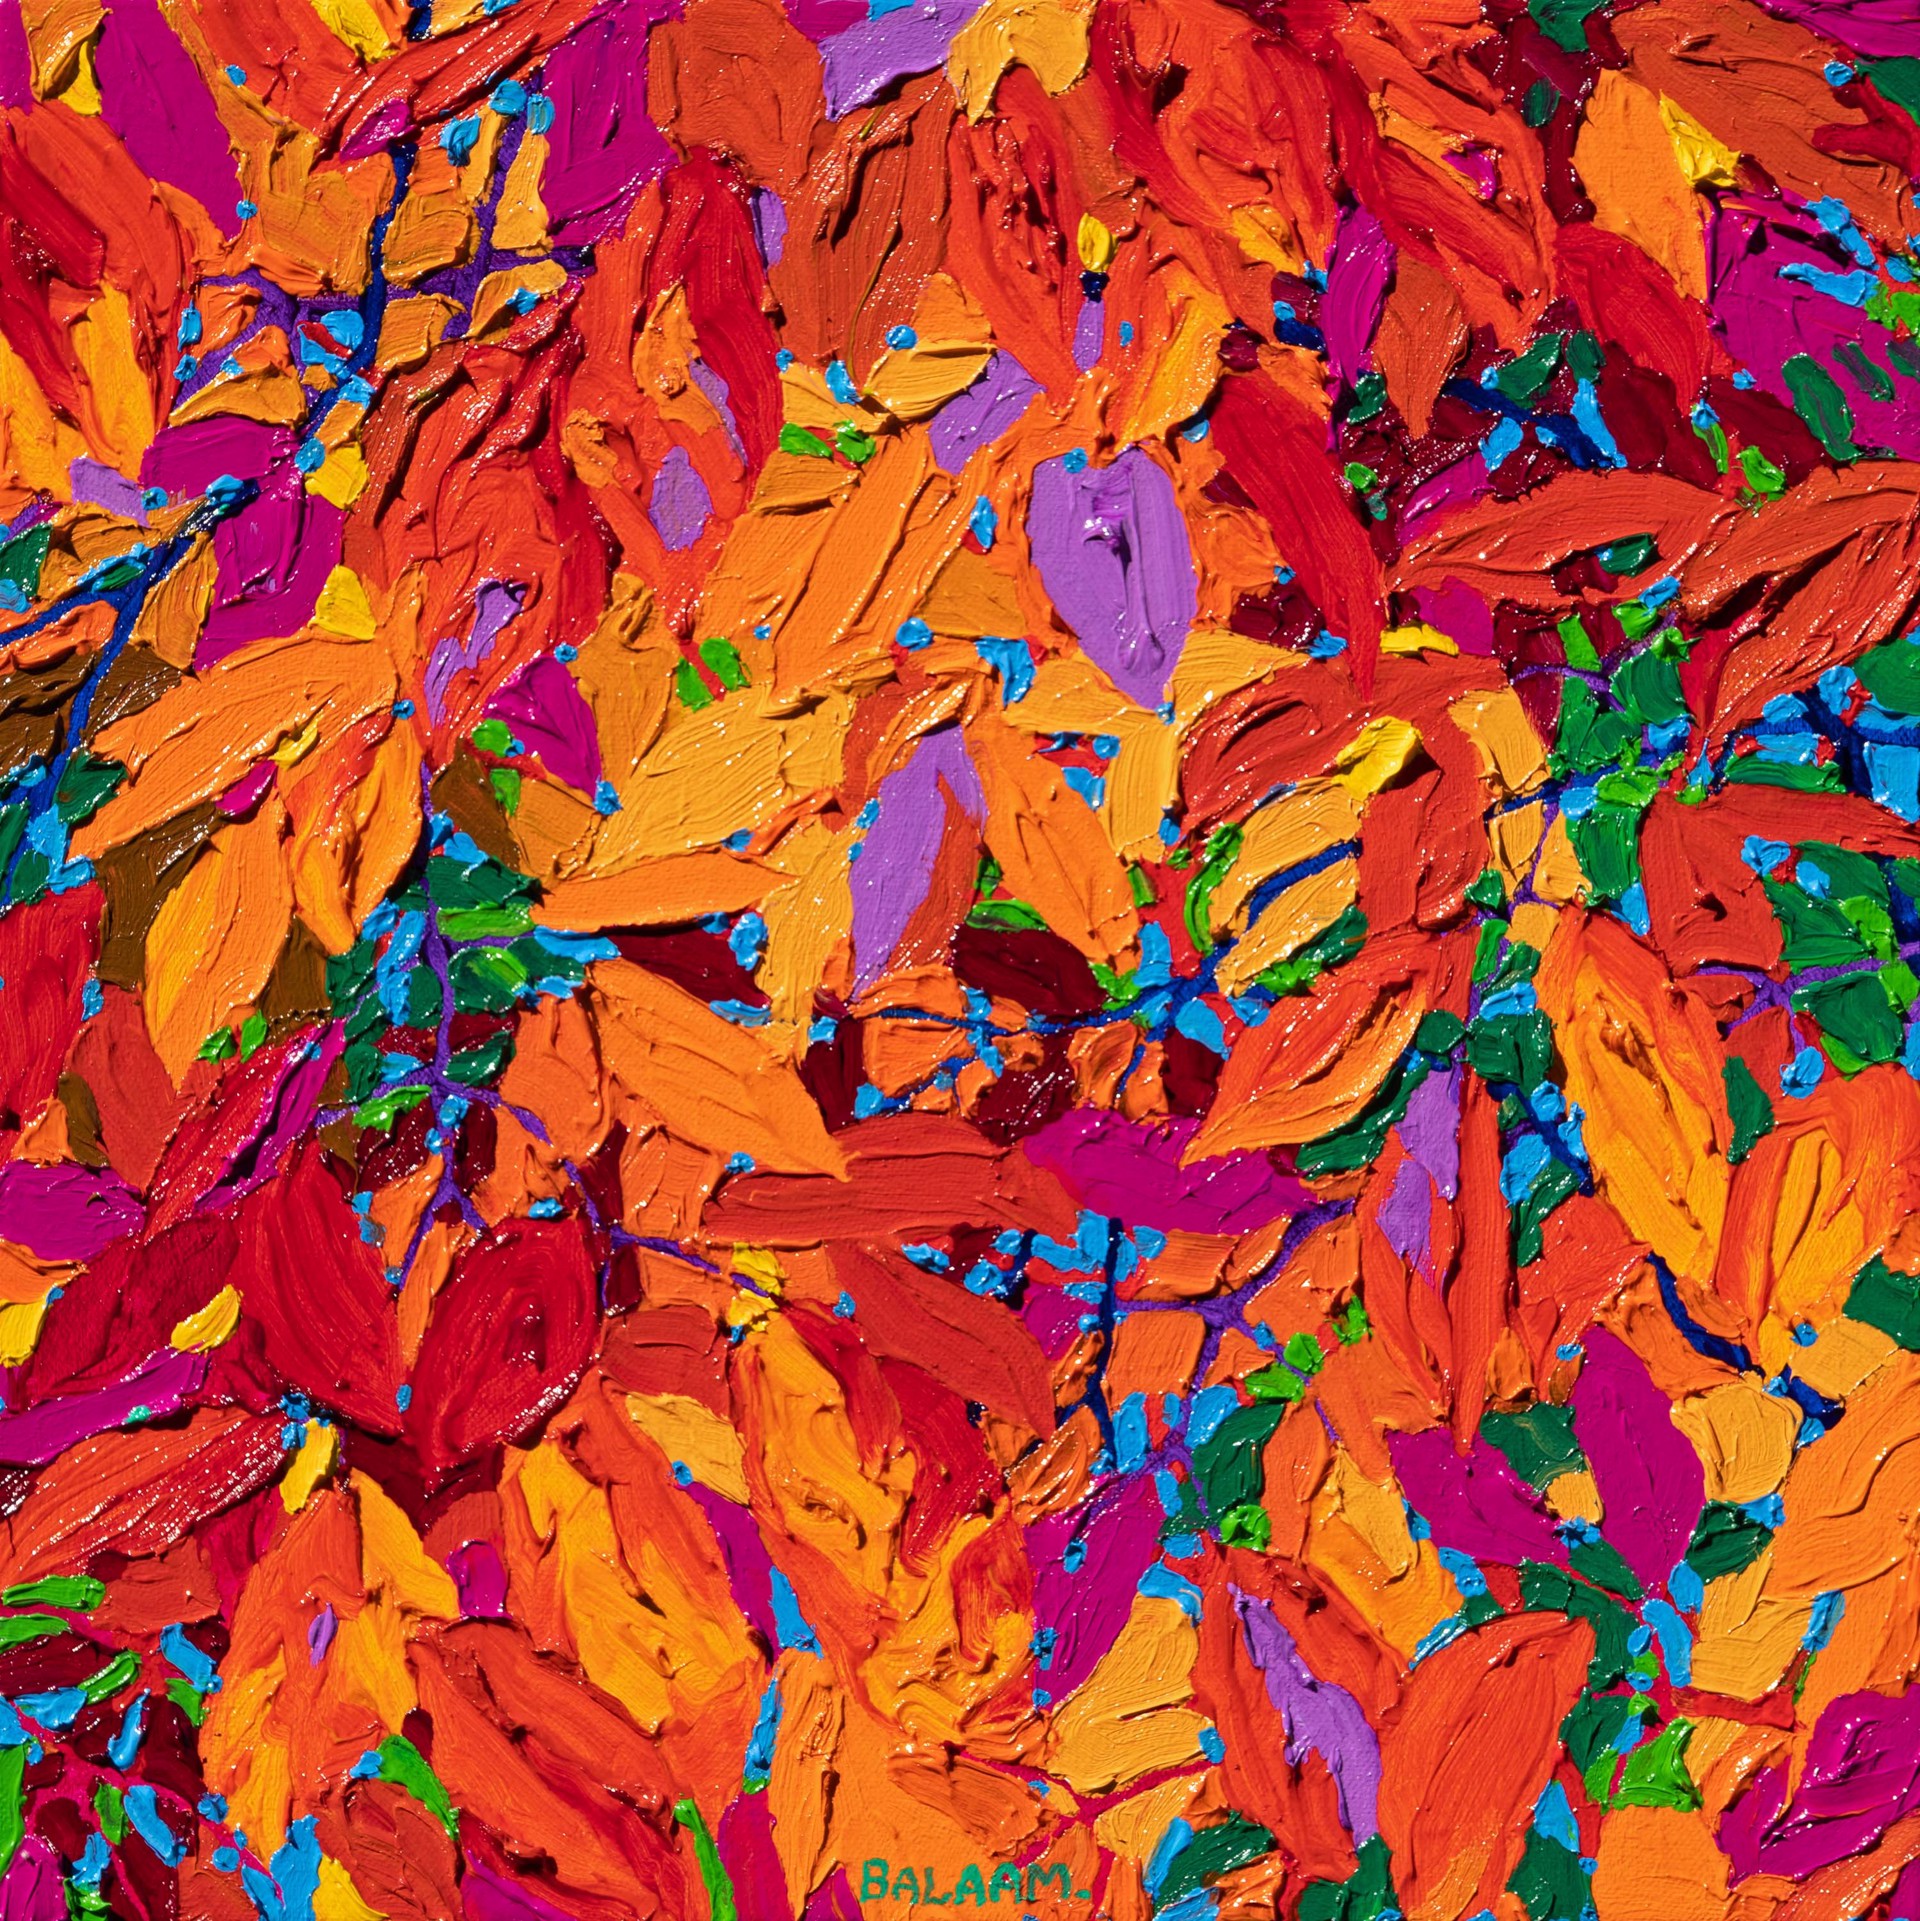 Glimpse - Every Leaf, Every Twig, Every Branch Series - Autumn Leaves by Frank Balaam